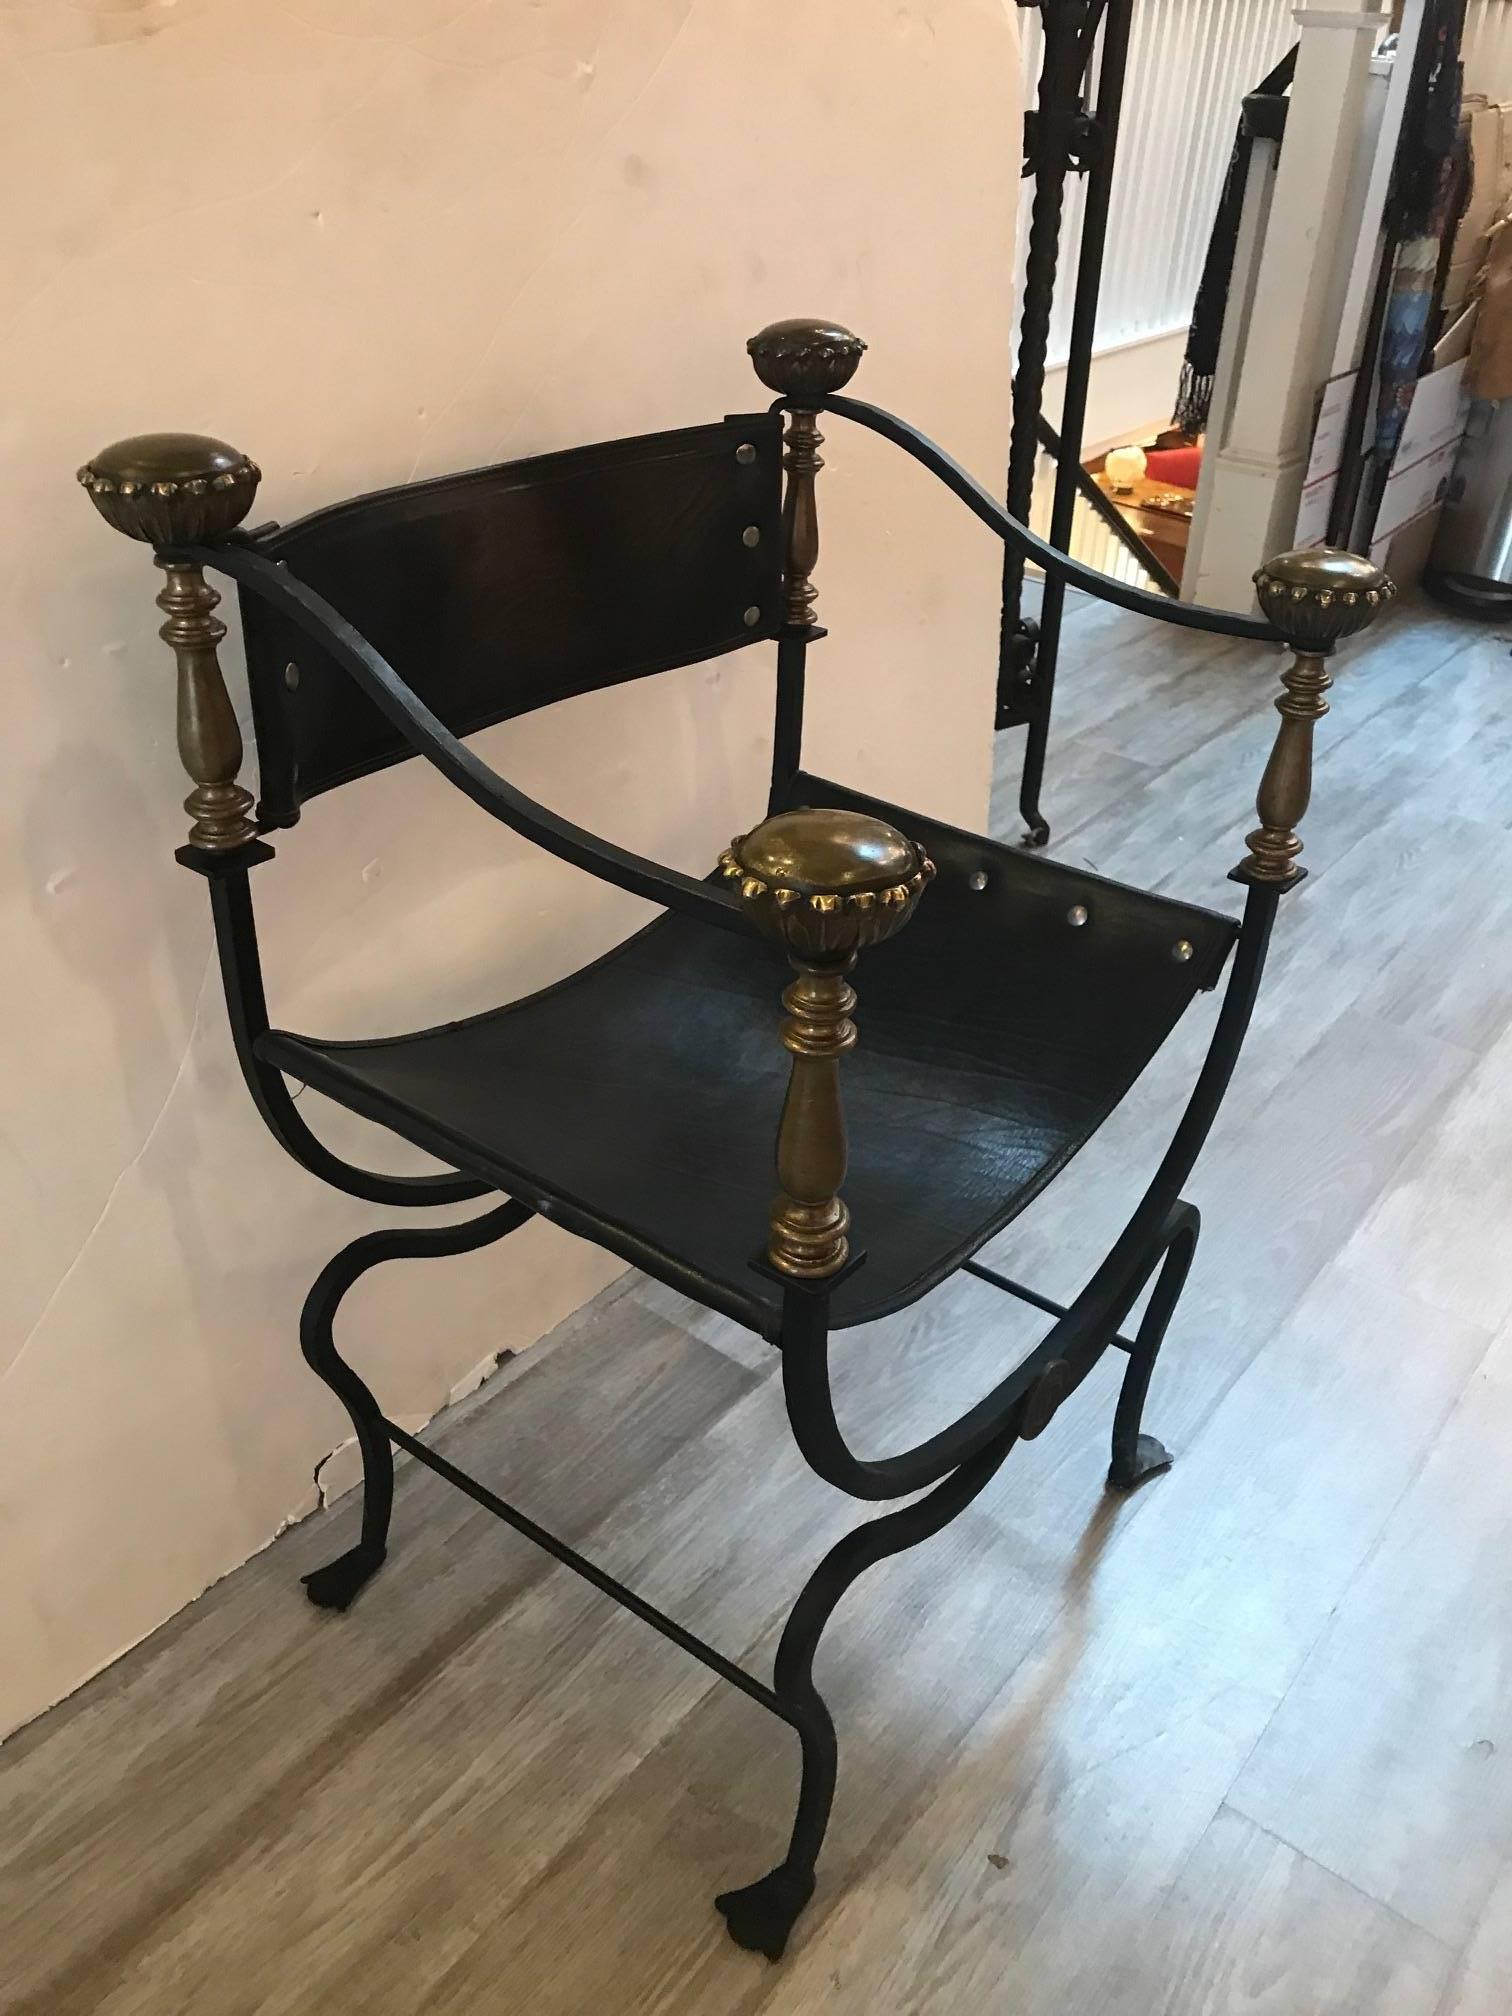 A mid-20th century hand-wrought iron and brass savonarola chair, made in Italy. Of Classic form with large brass finials in each corner. The back and seats are riveted black leather. Solid and sturdy.